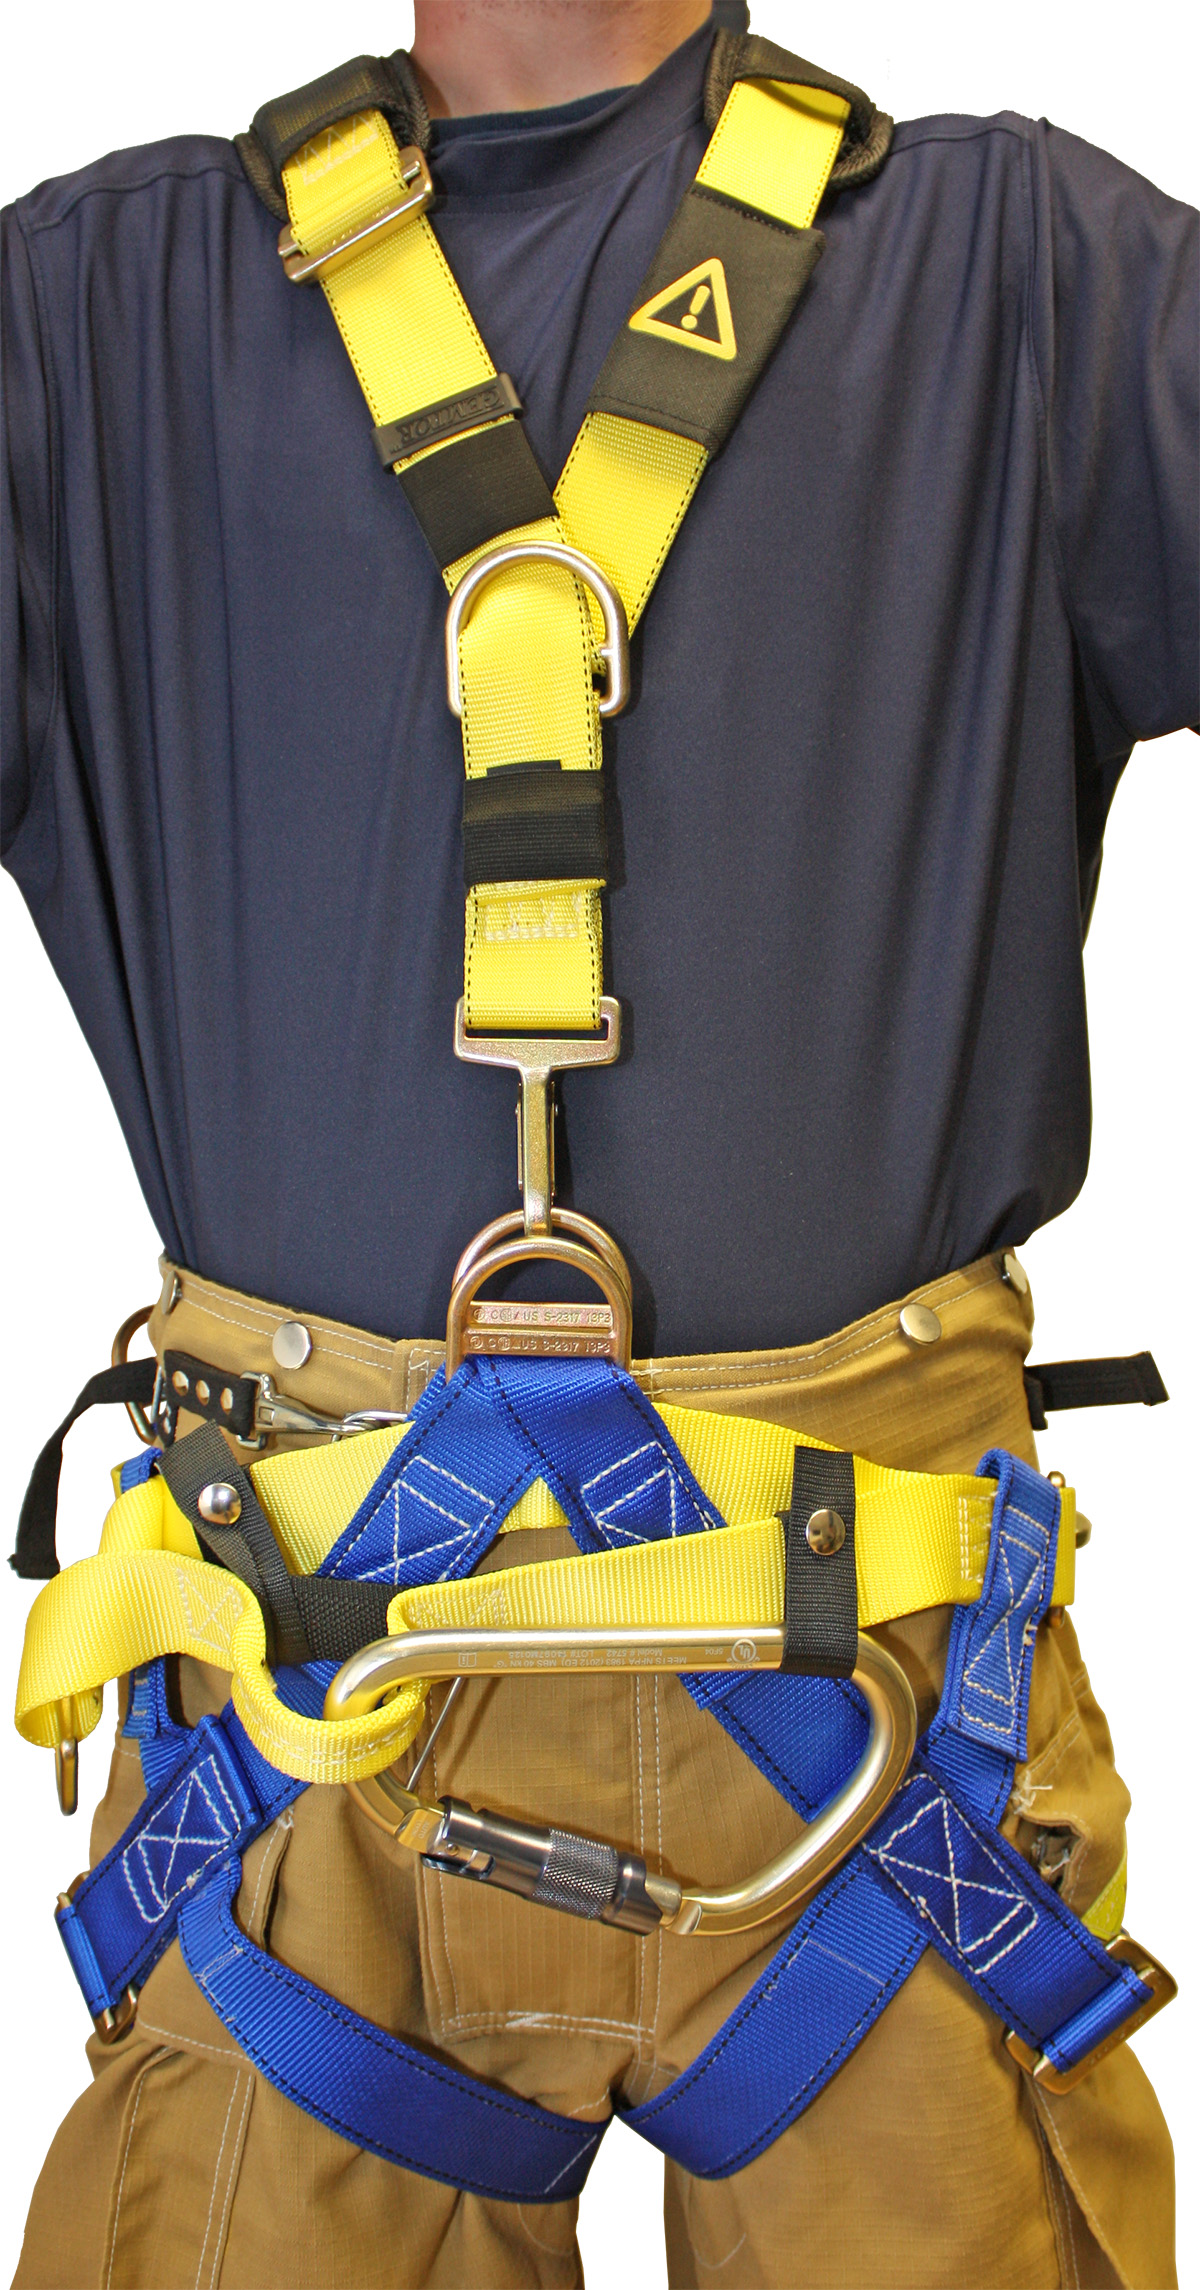 THE SAFETY HARNESS CARABINER